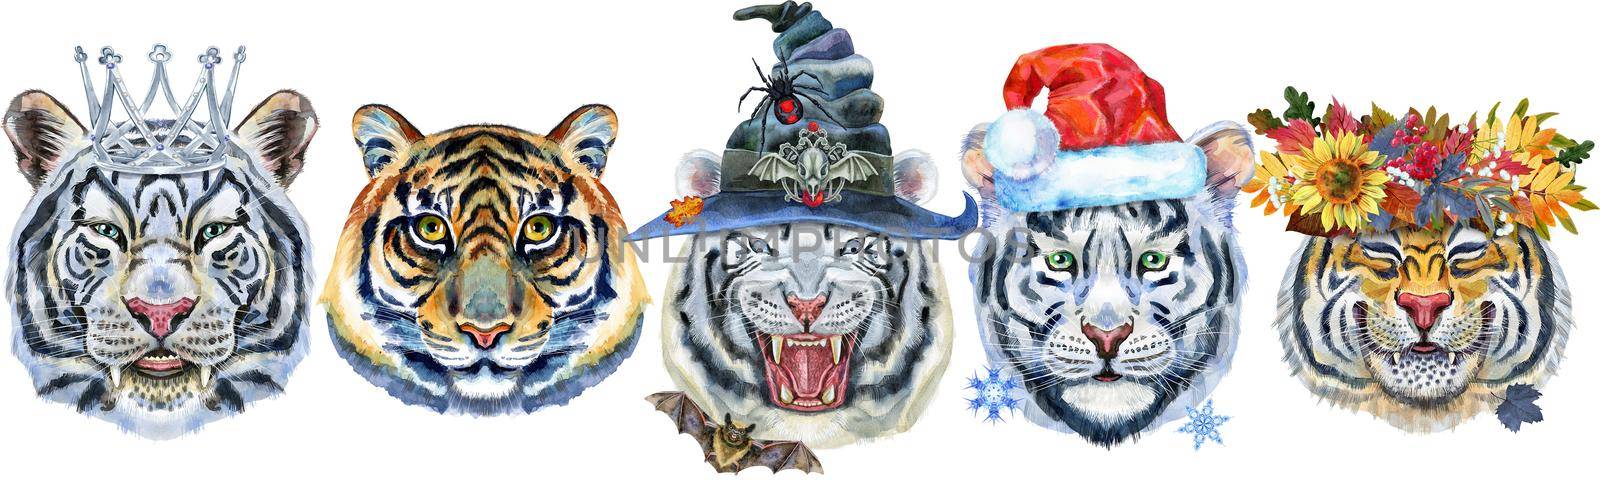 Watercolor illustration of orange smiling tiger in a wreath of autumn leaves, white tigers in crown, witch hat and Santa hat